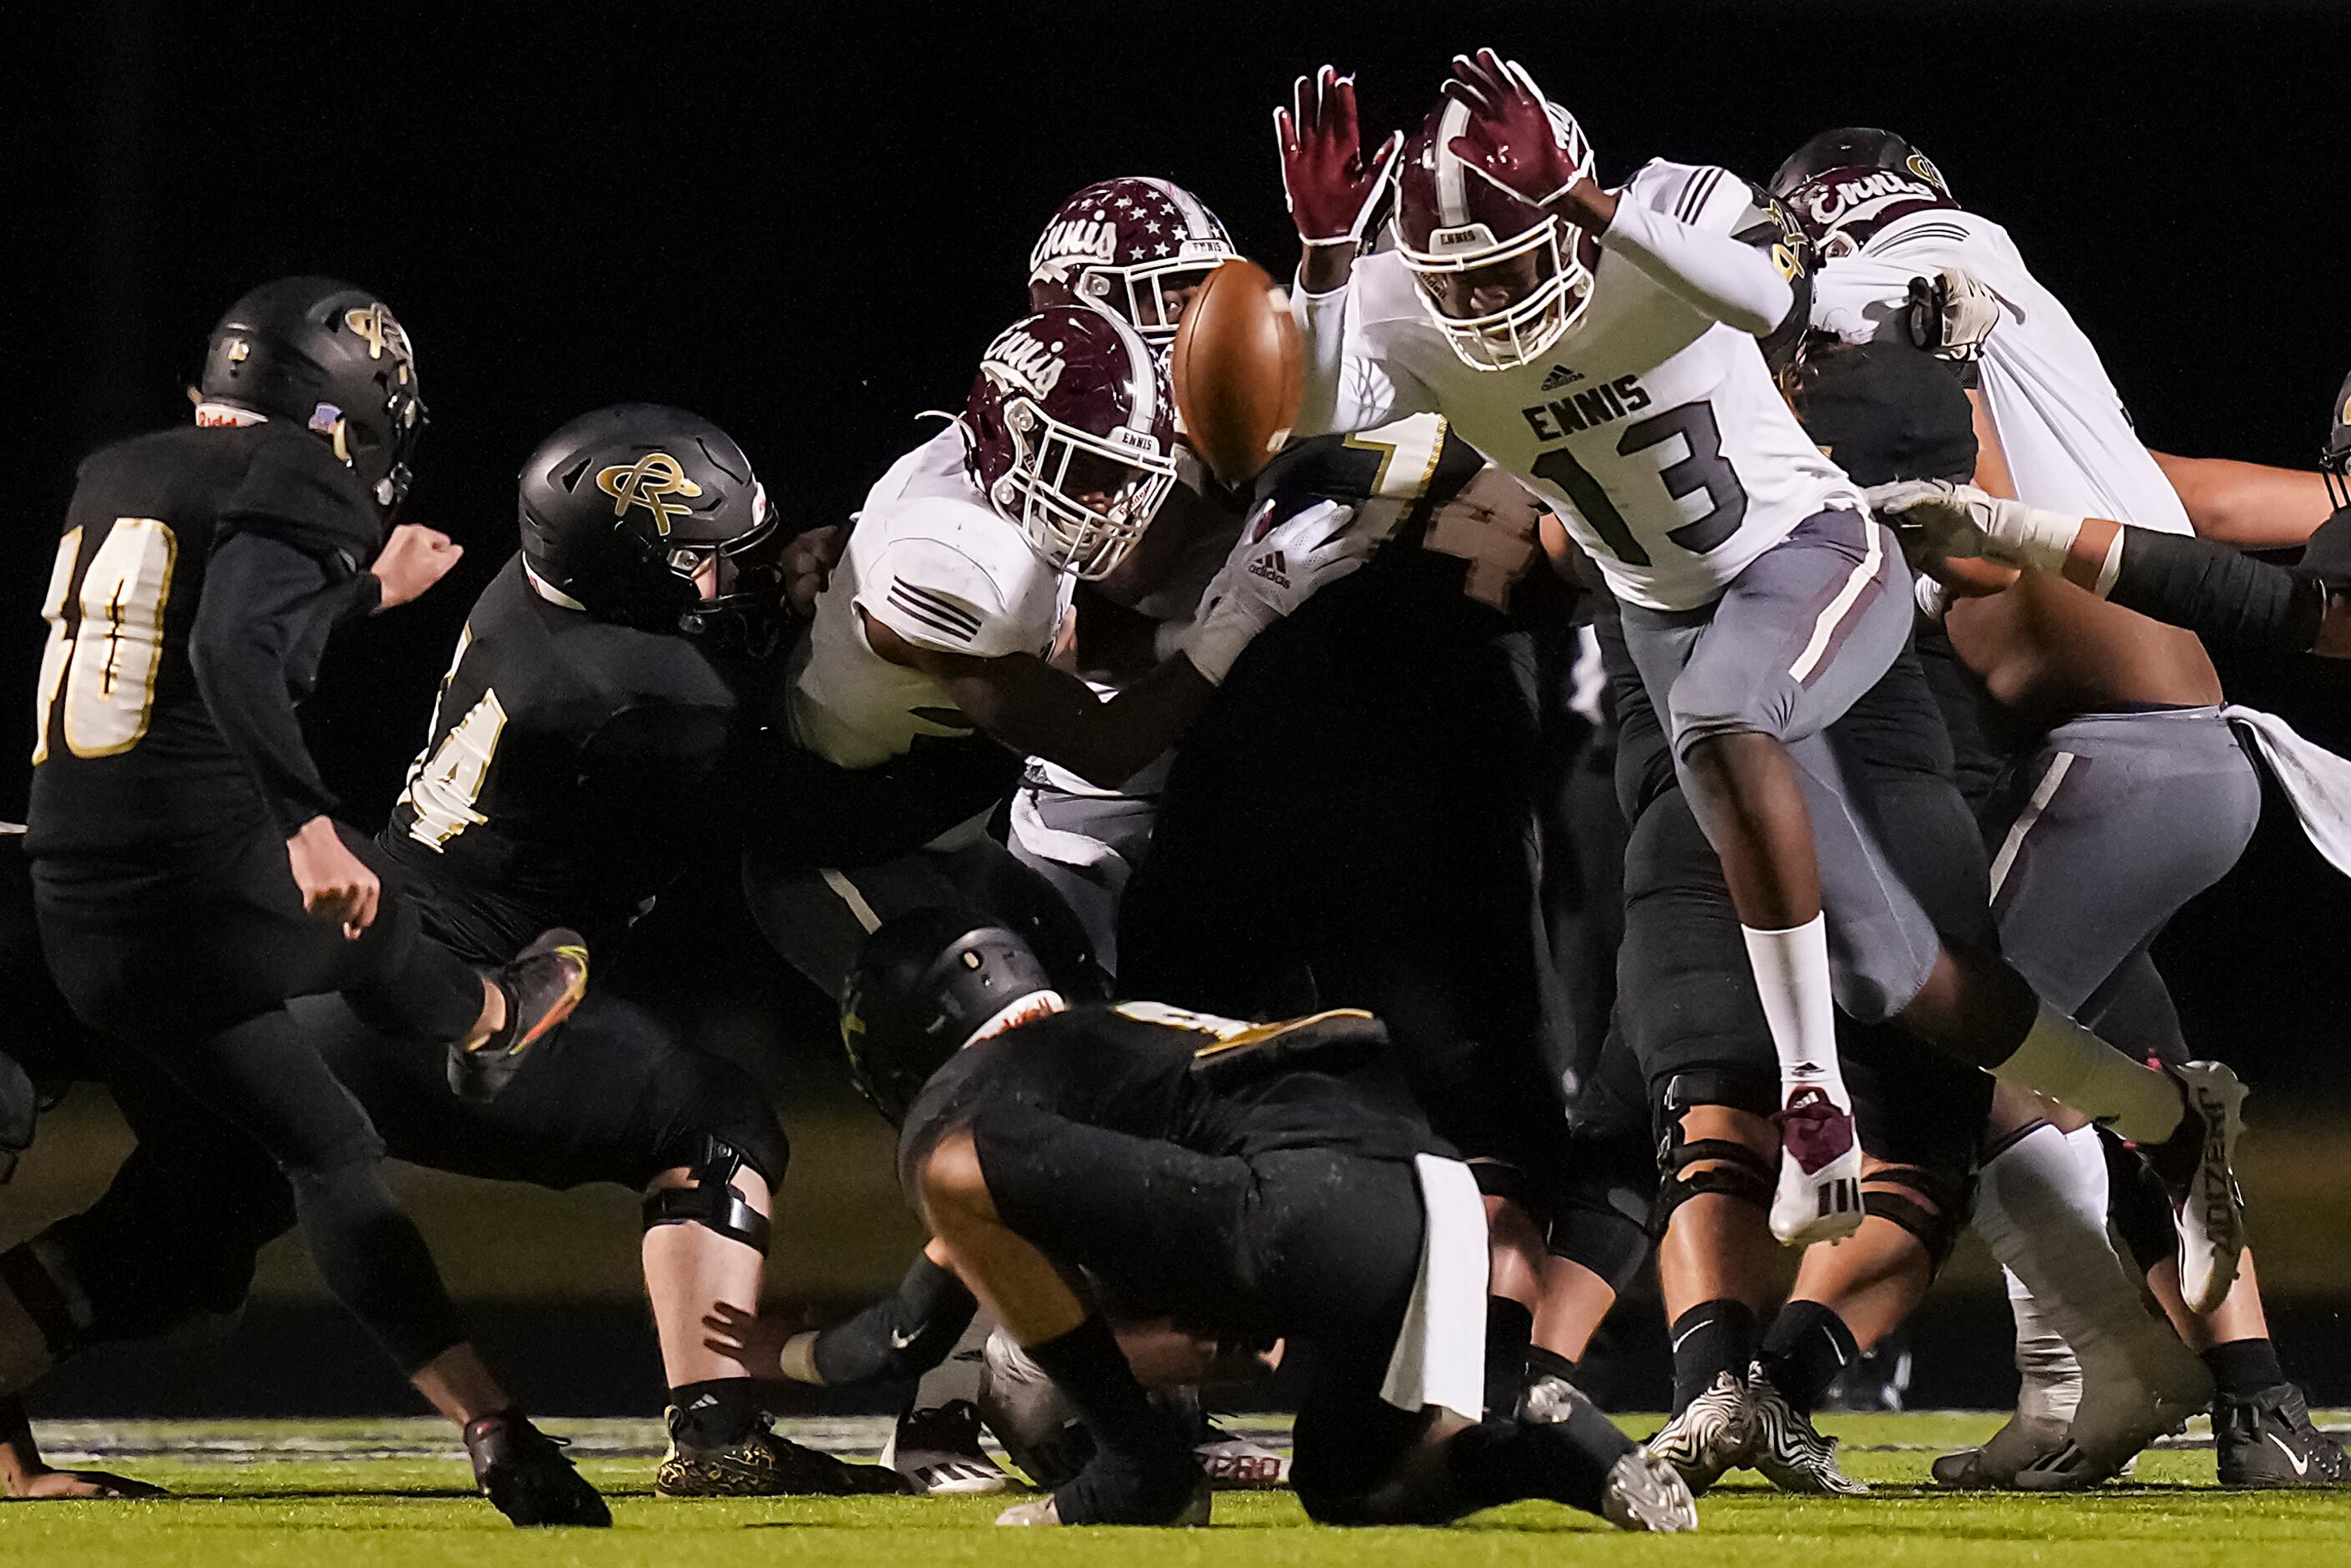 Ennis wide receiver Skylan Simmons (13) blocks an extra point attempt by Royse City kicker...